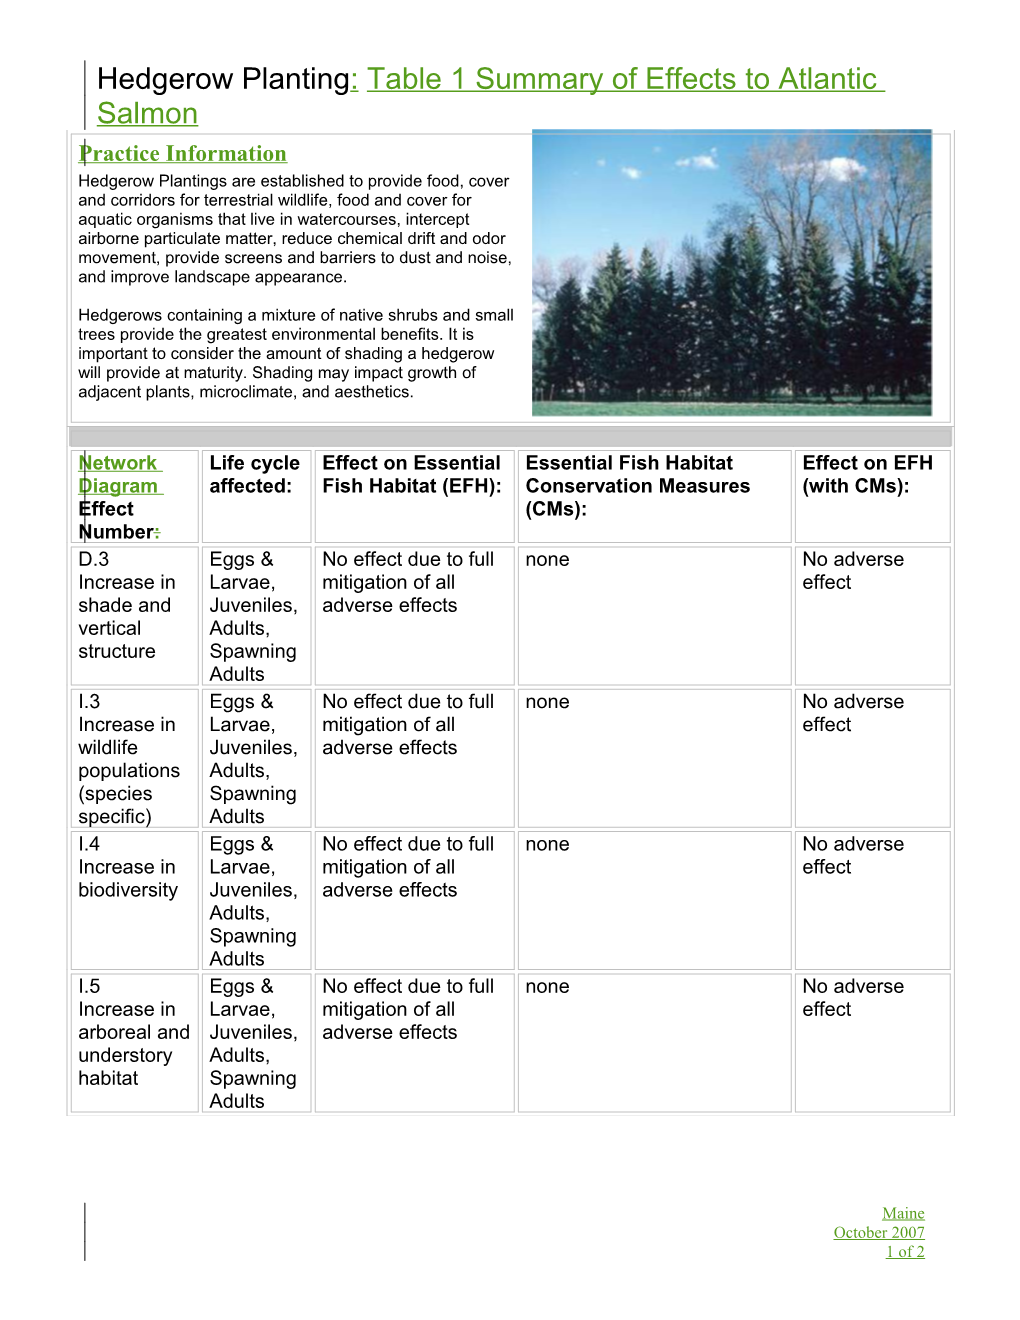 Hedgerow Planting:Table 1 Summary of Effects to Atlantic Salmon